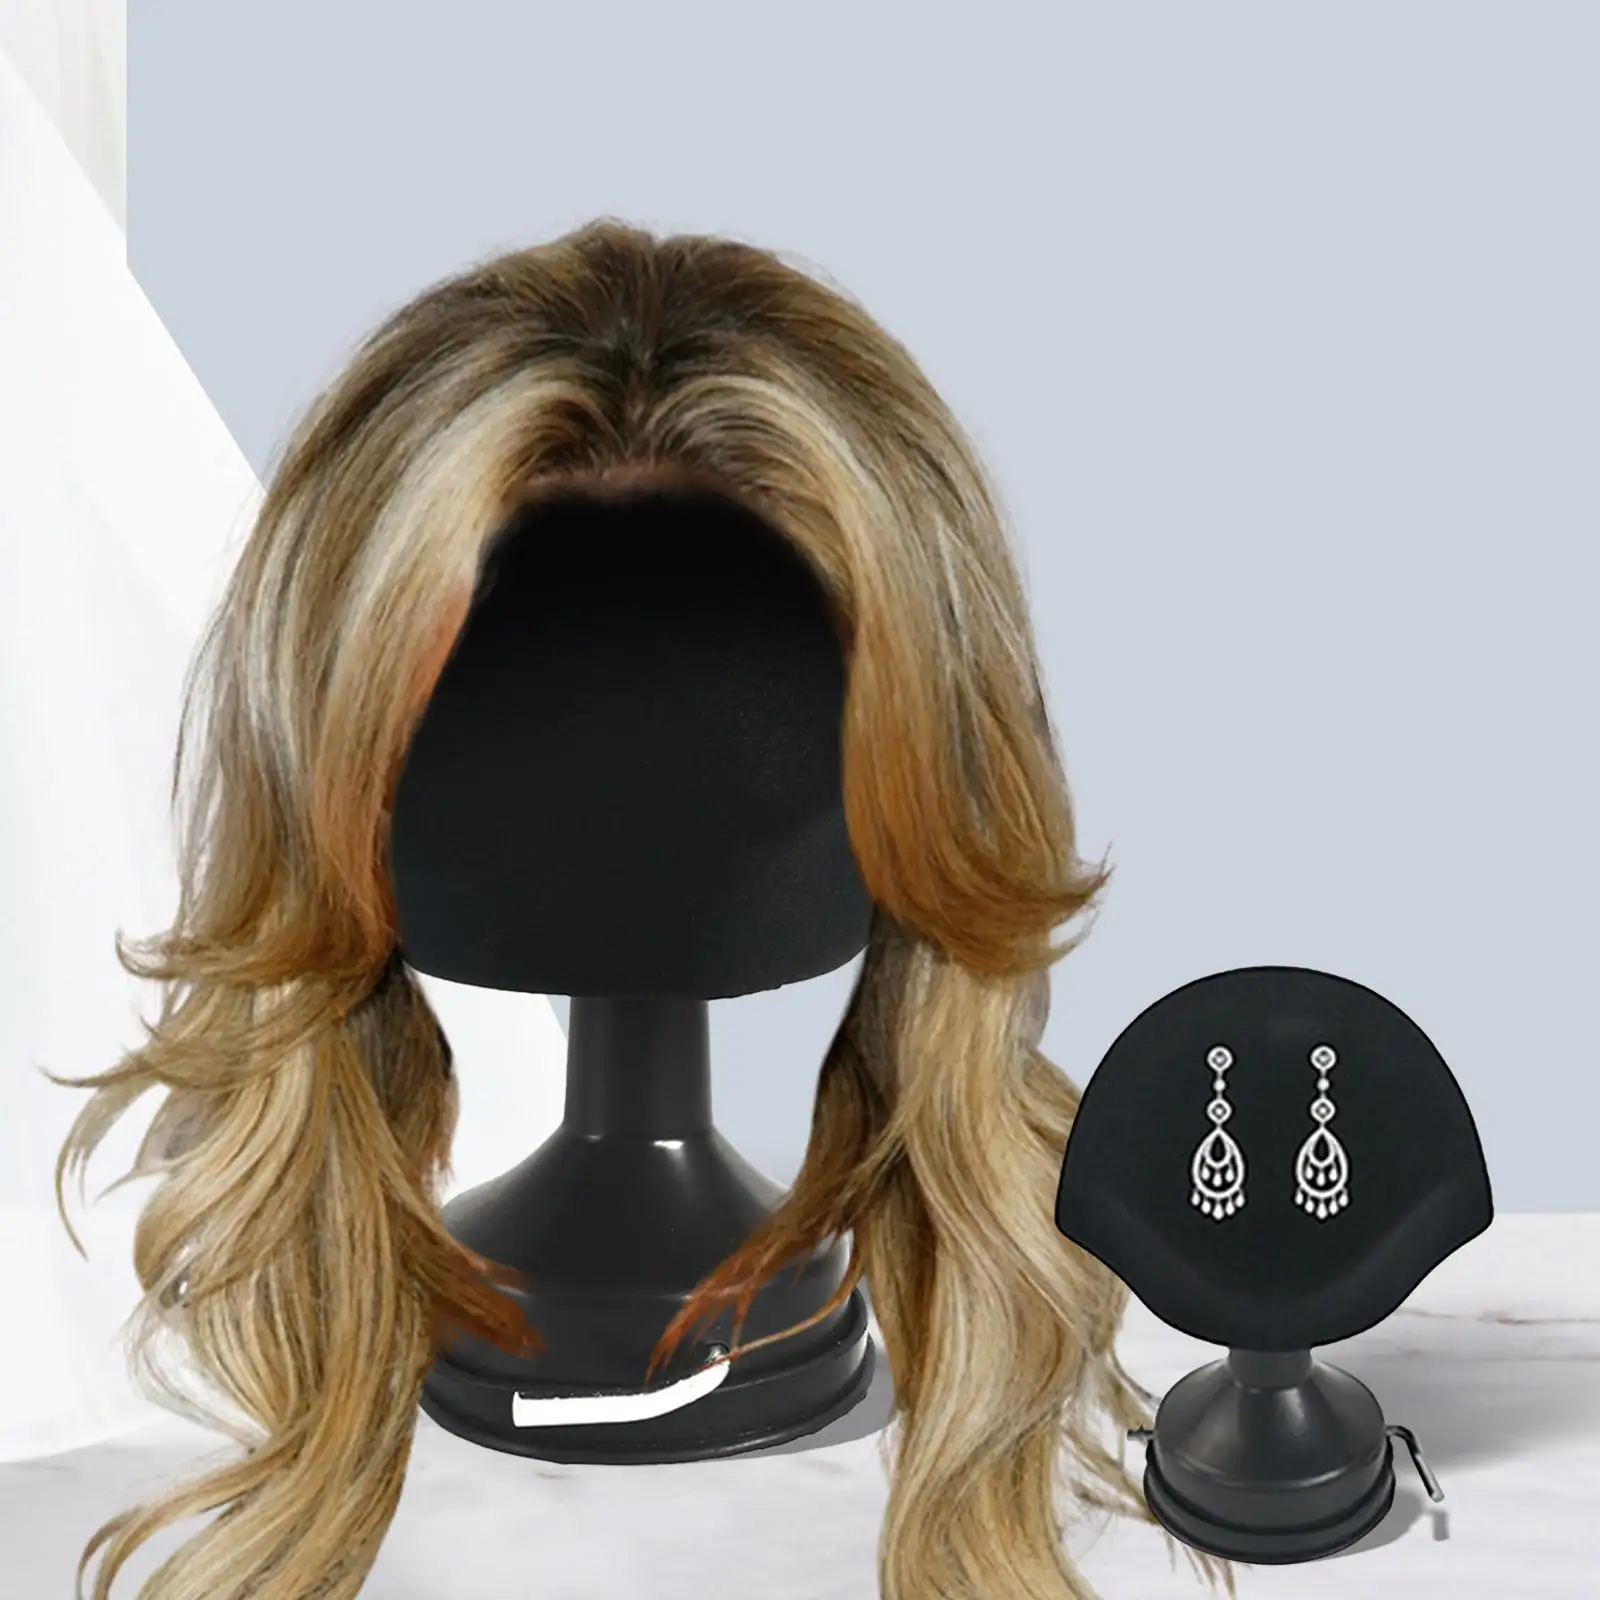 Portable Wig Stand with Sucker Headform Durable Practical Storage Hair Holder Stands for Glasses Earrings Travel Toupee Tool